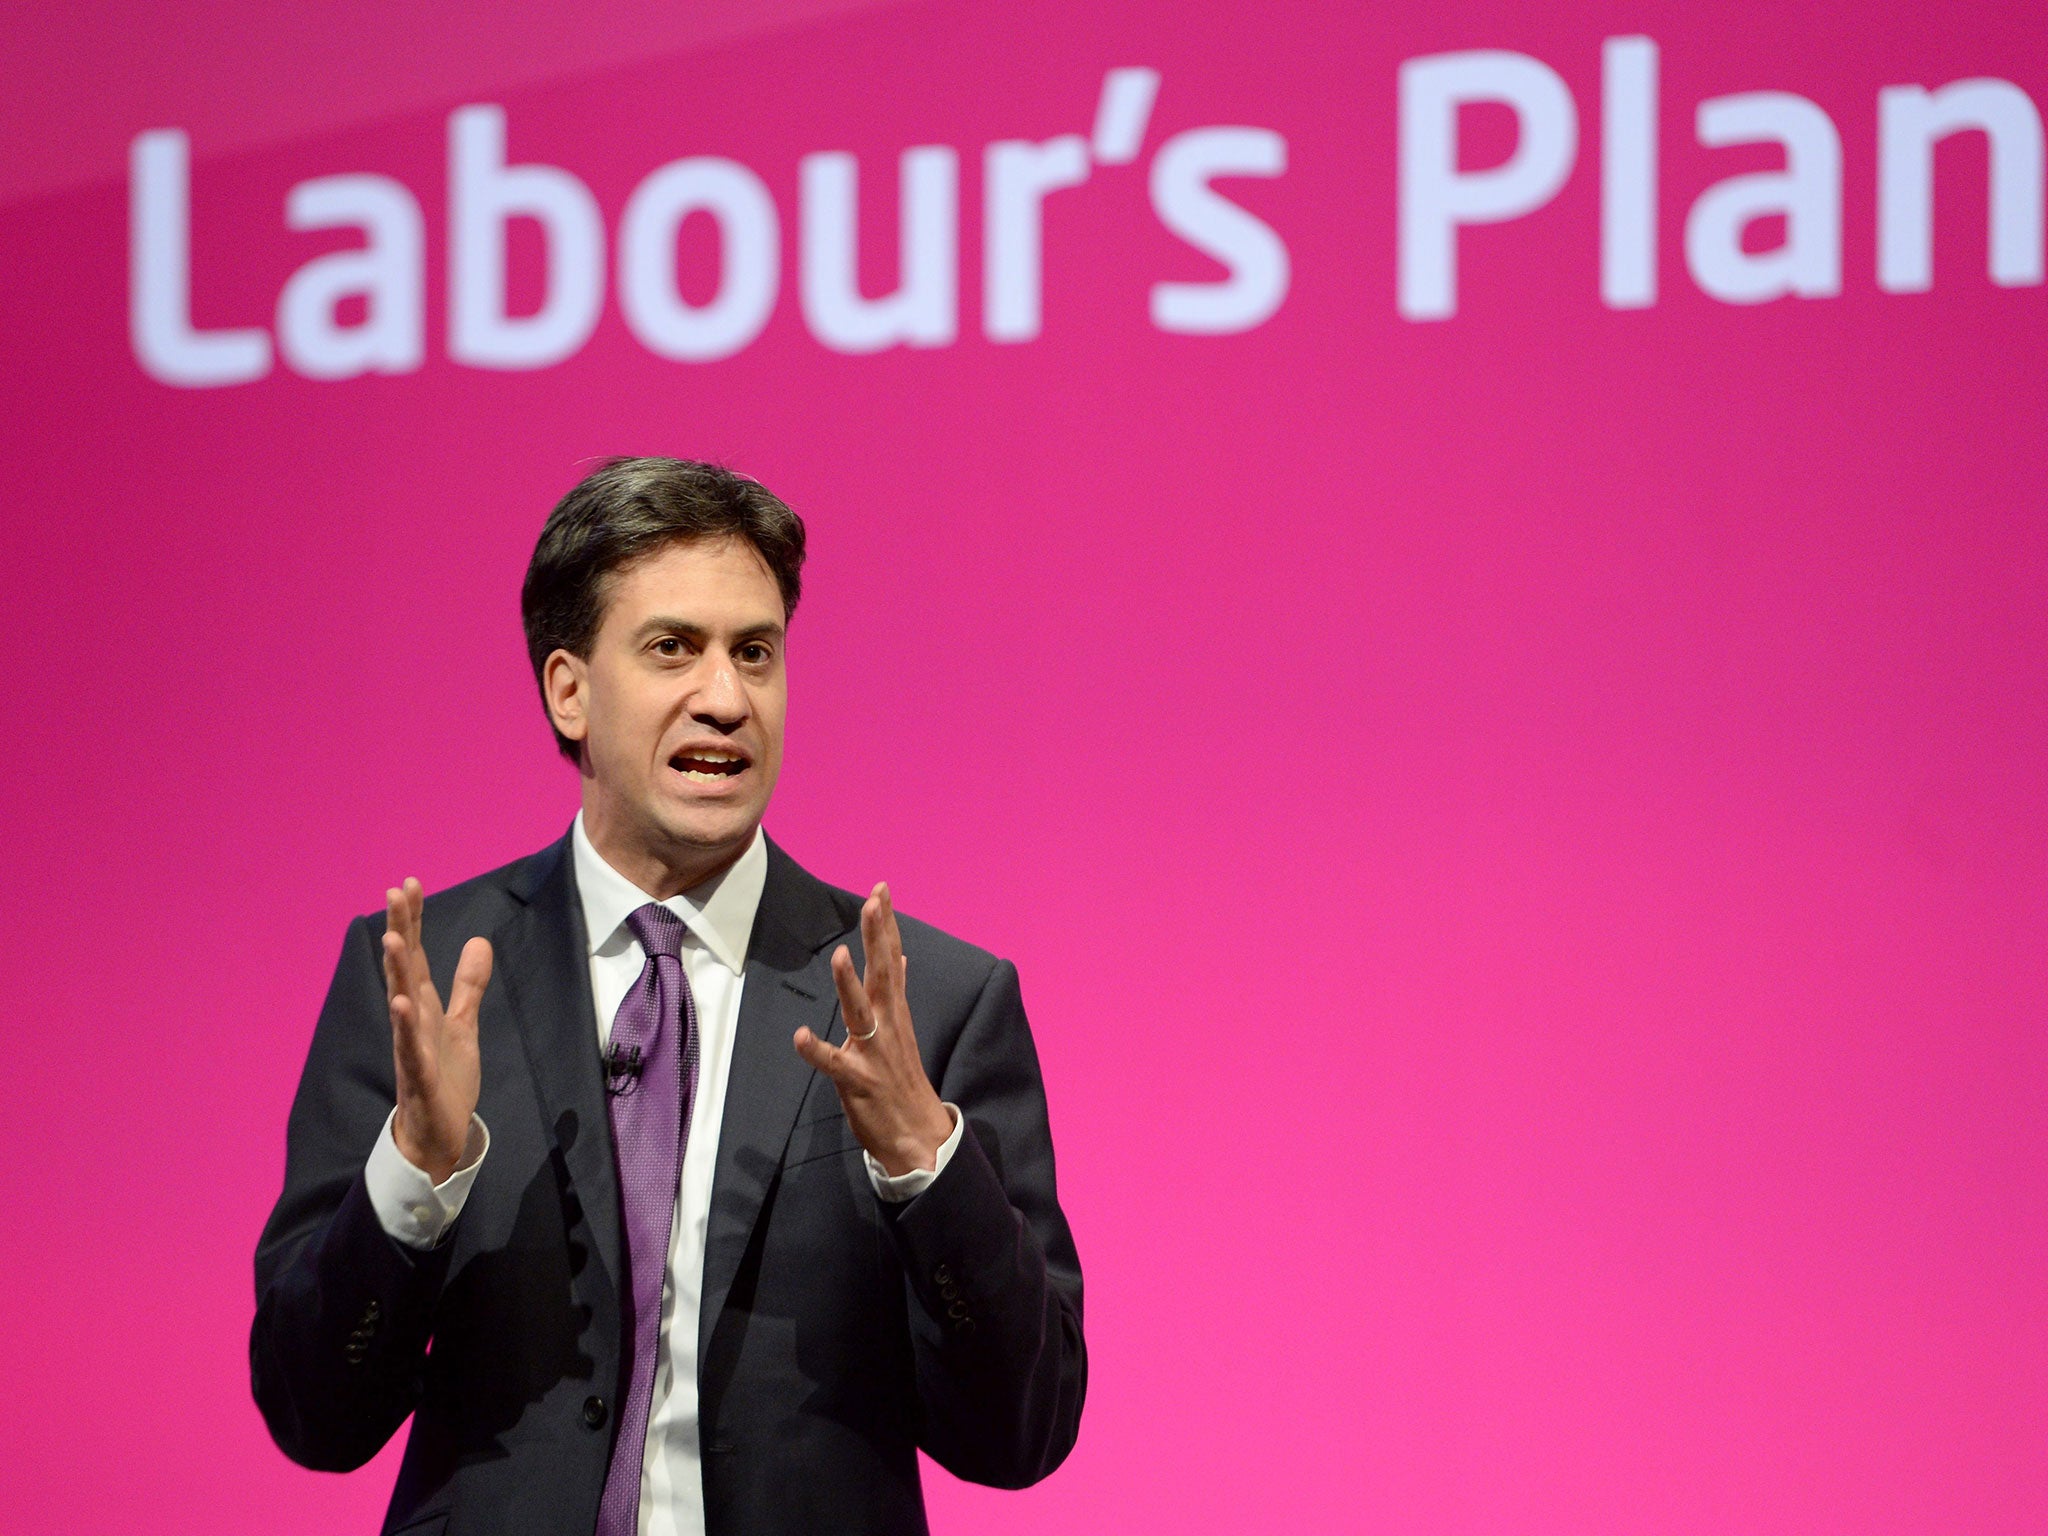 Ed Miliband at the Labour Party conference